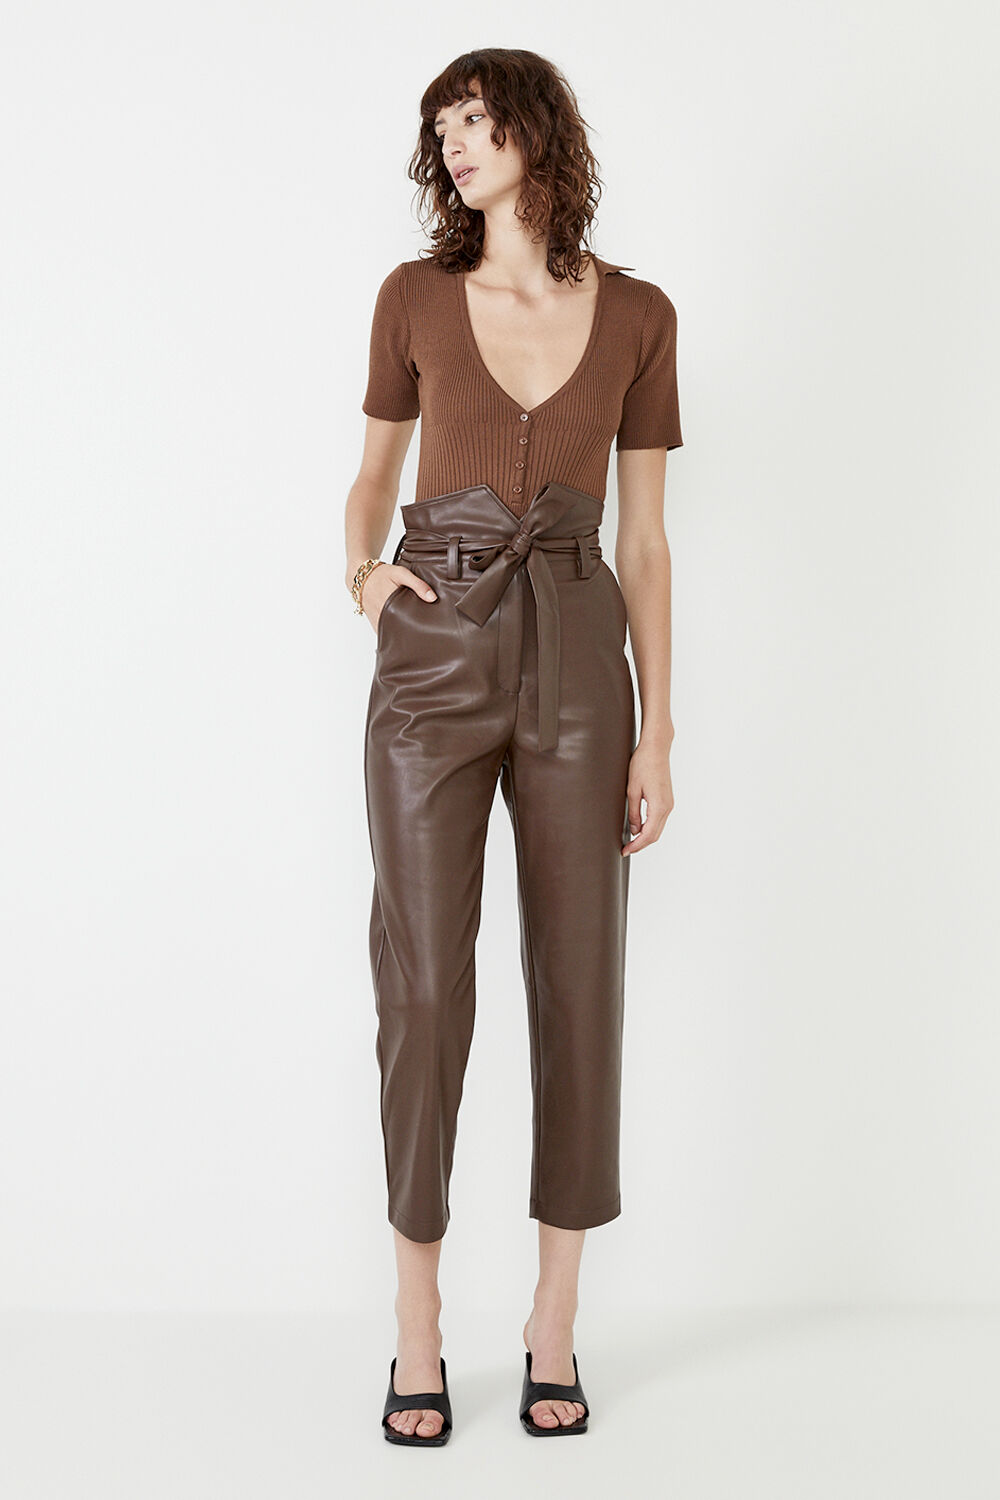 THEODORA KNIT BODYSUIT  in colour CHOCOLATE BROWN